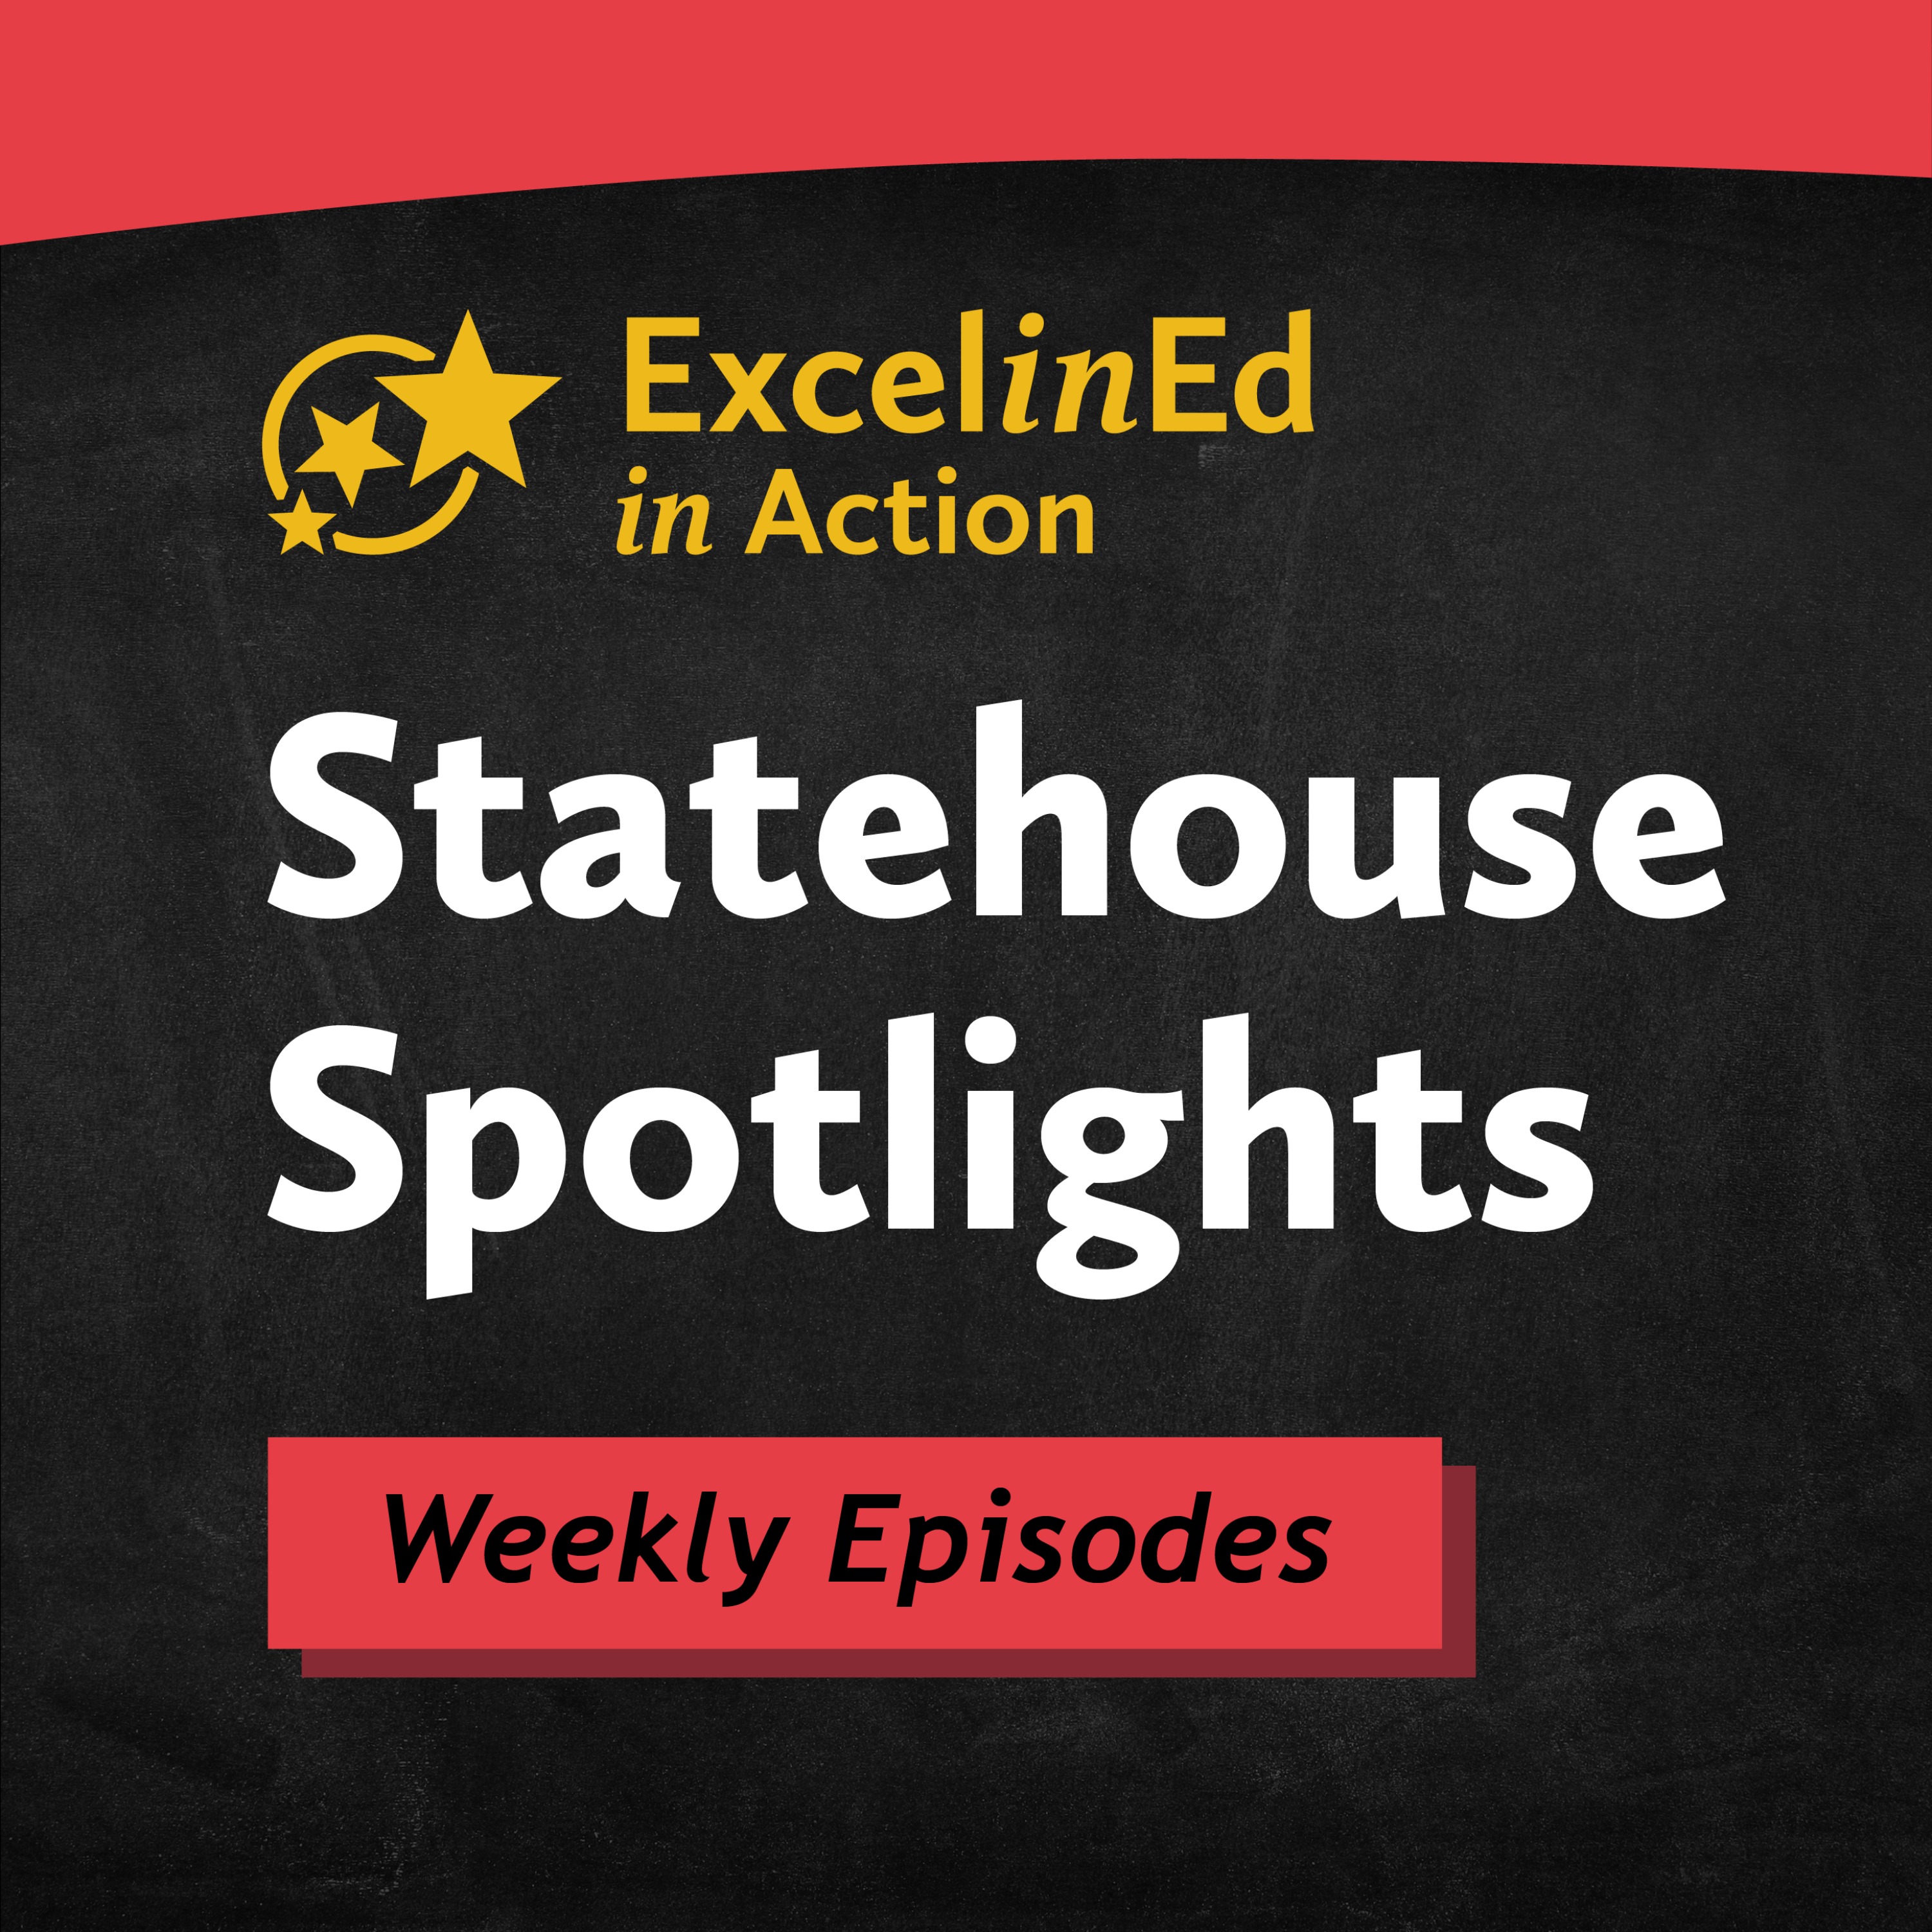 ExcelinEd in Action Statehouse Spotlights